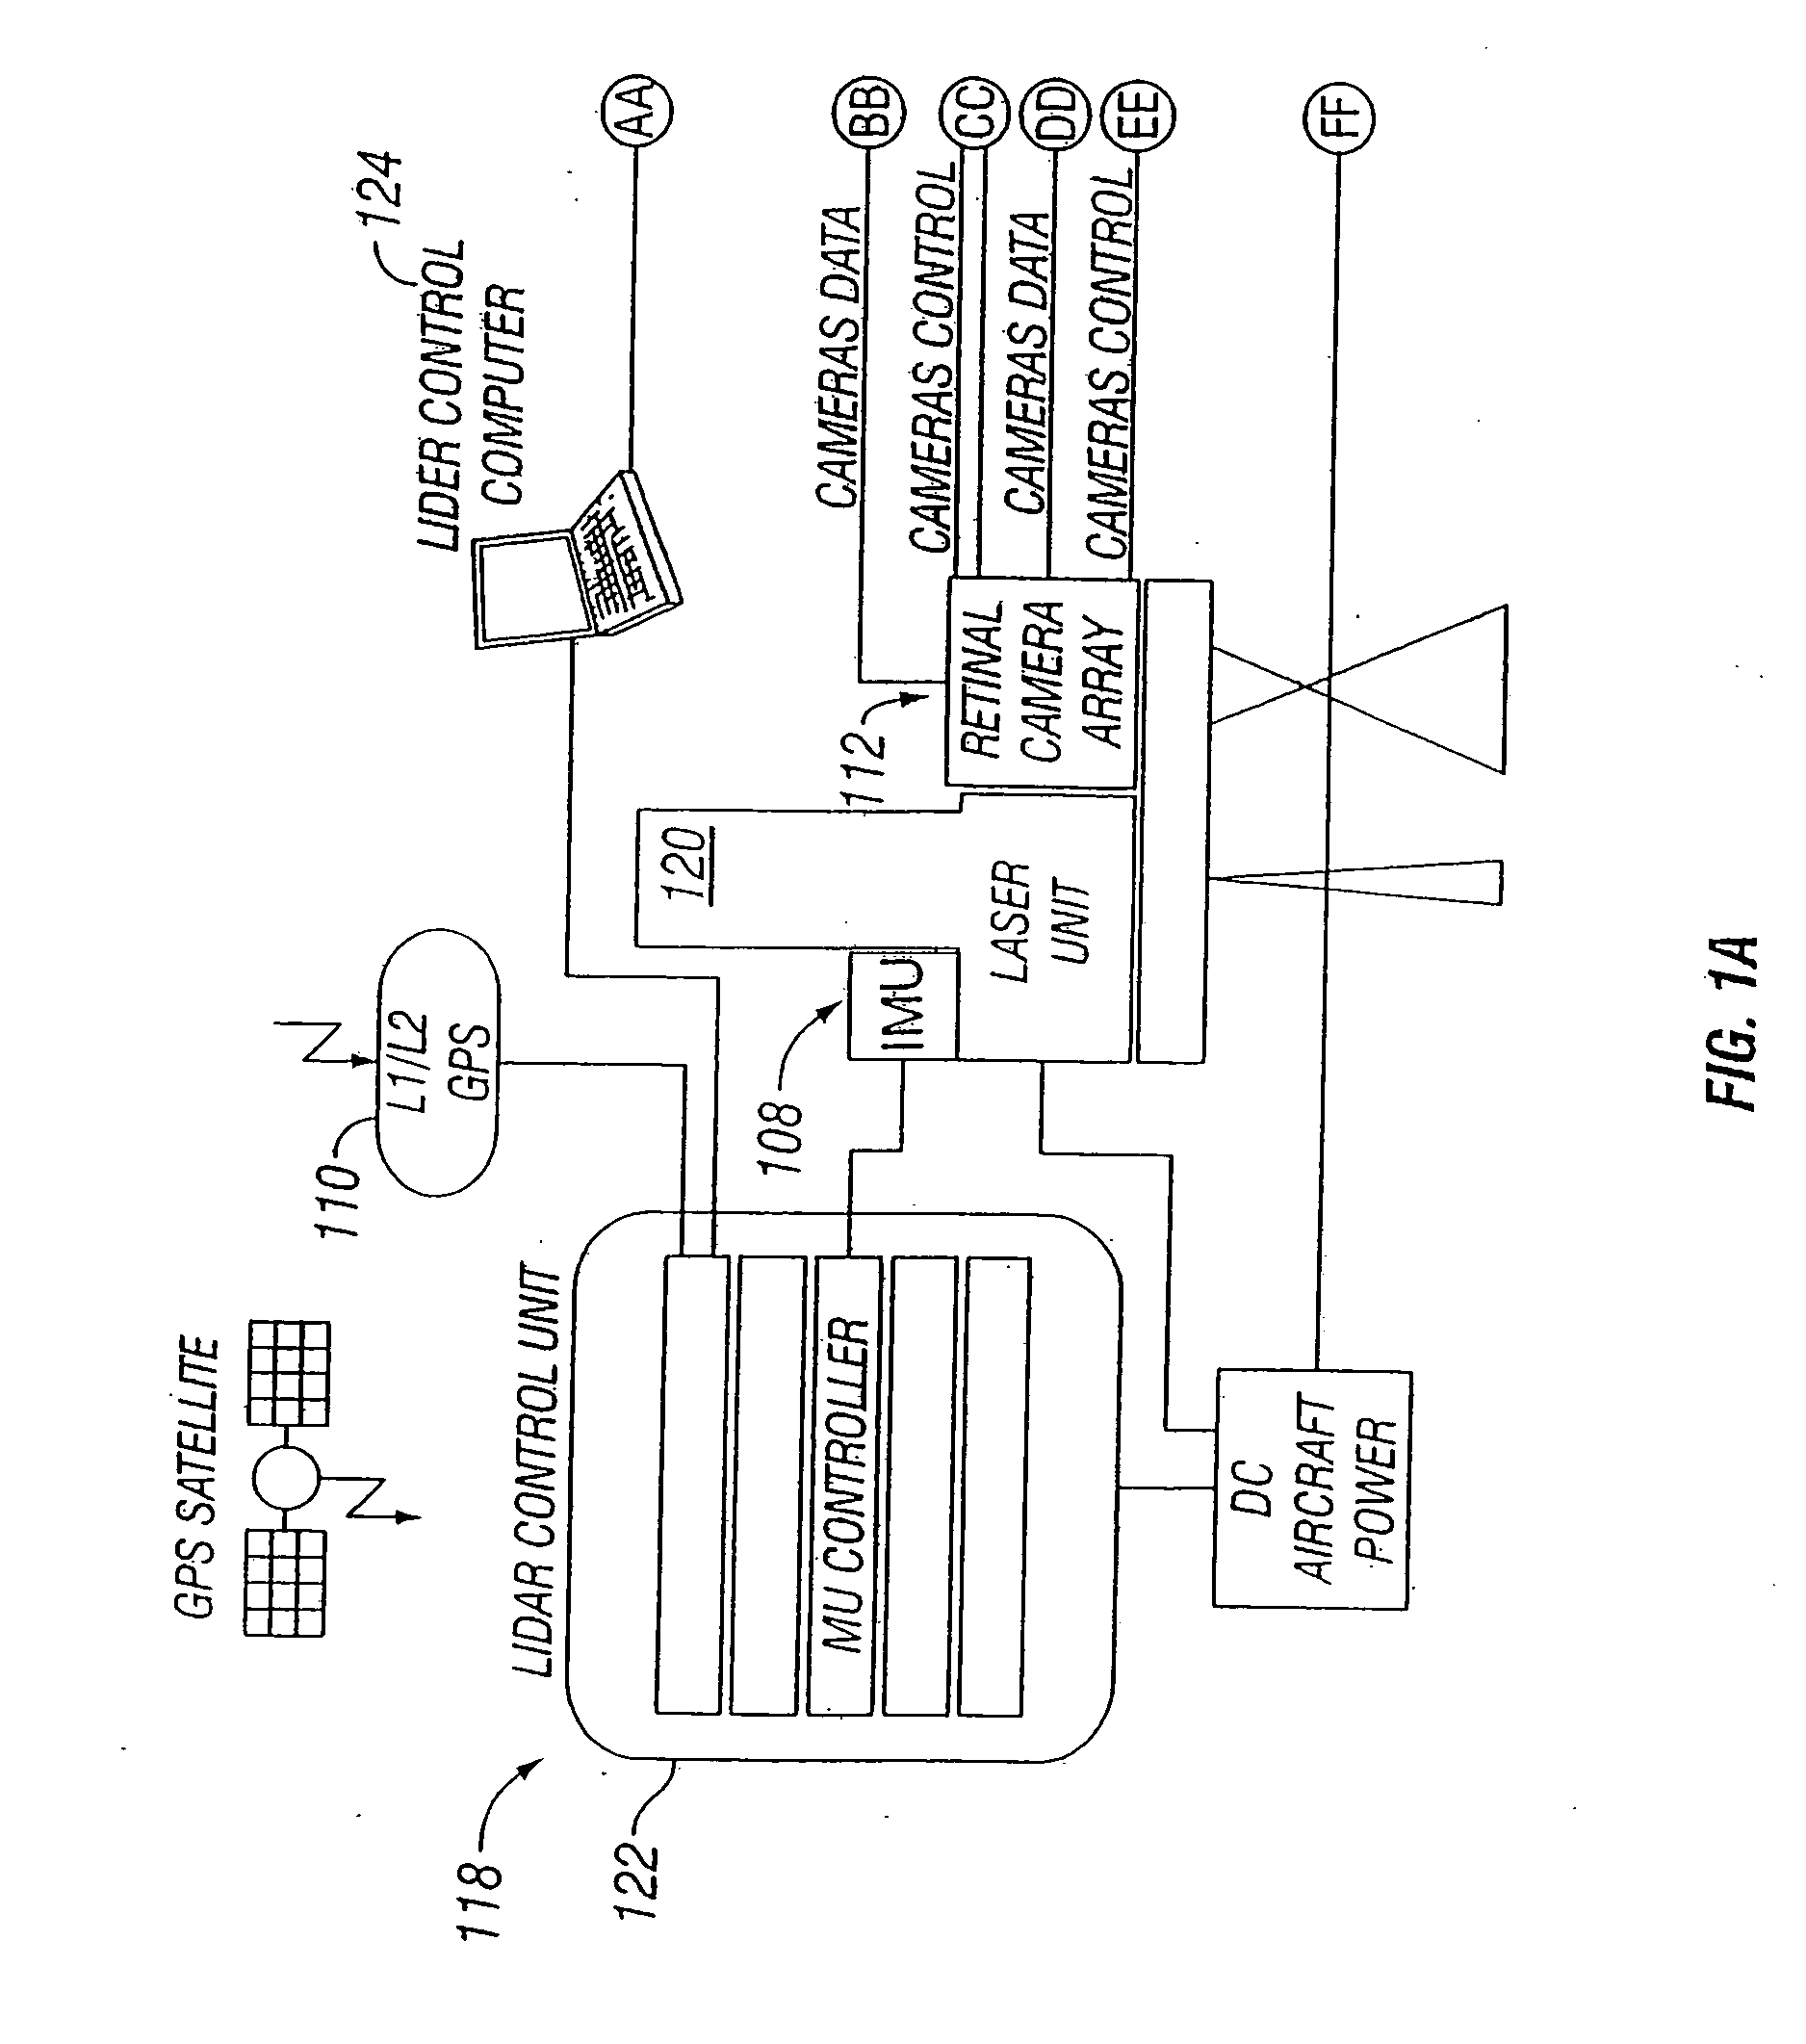 Vehicle based data collection and processing system and imaging sensor system and methods thereof